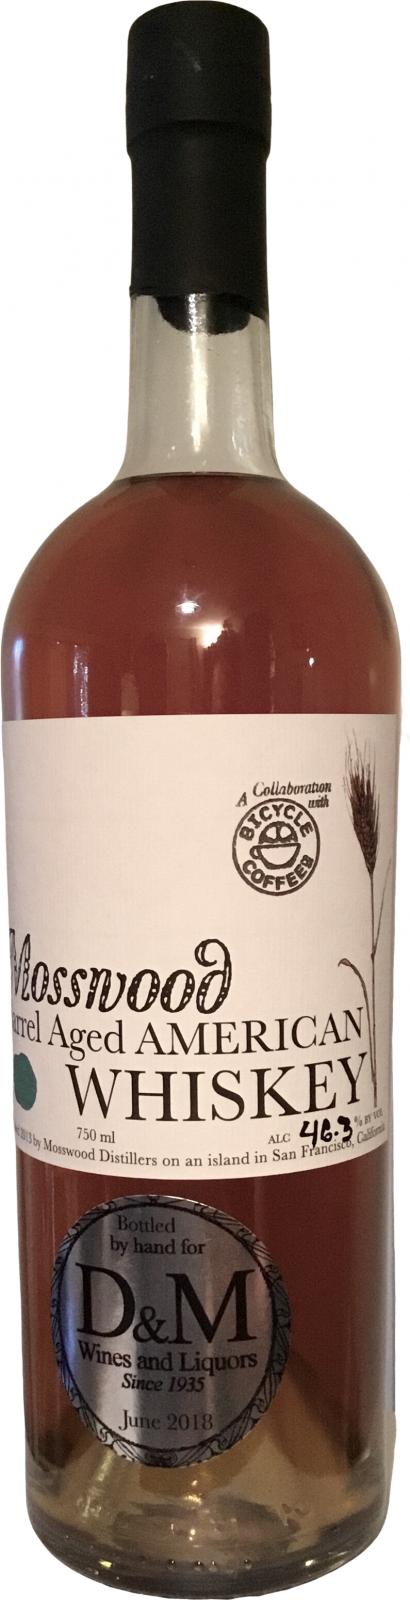 Mosswood Barrel Aged American Whiskey